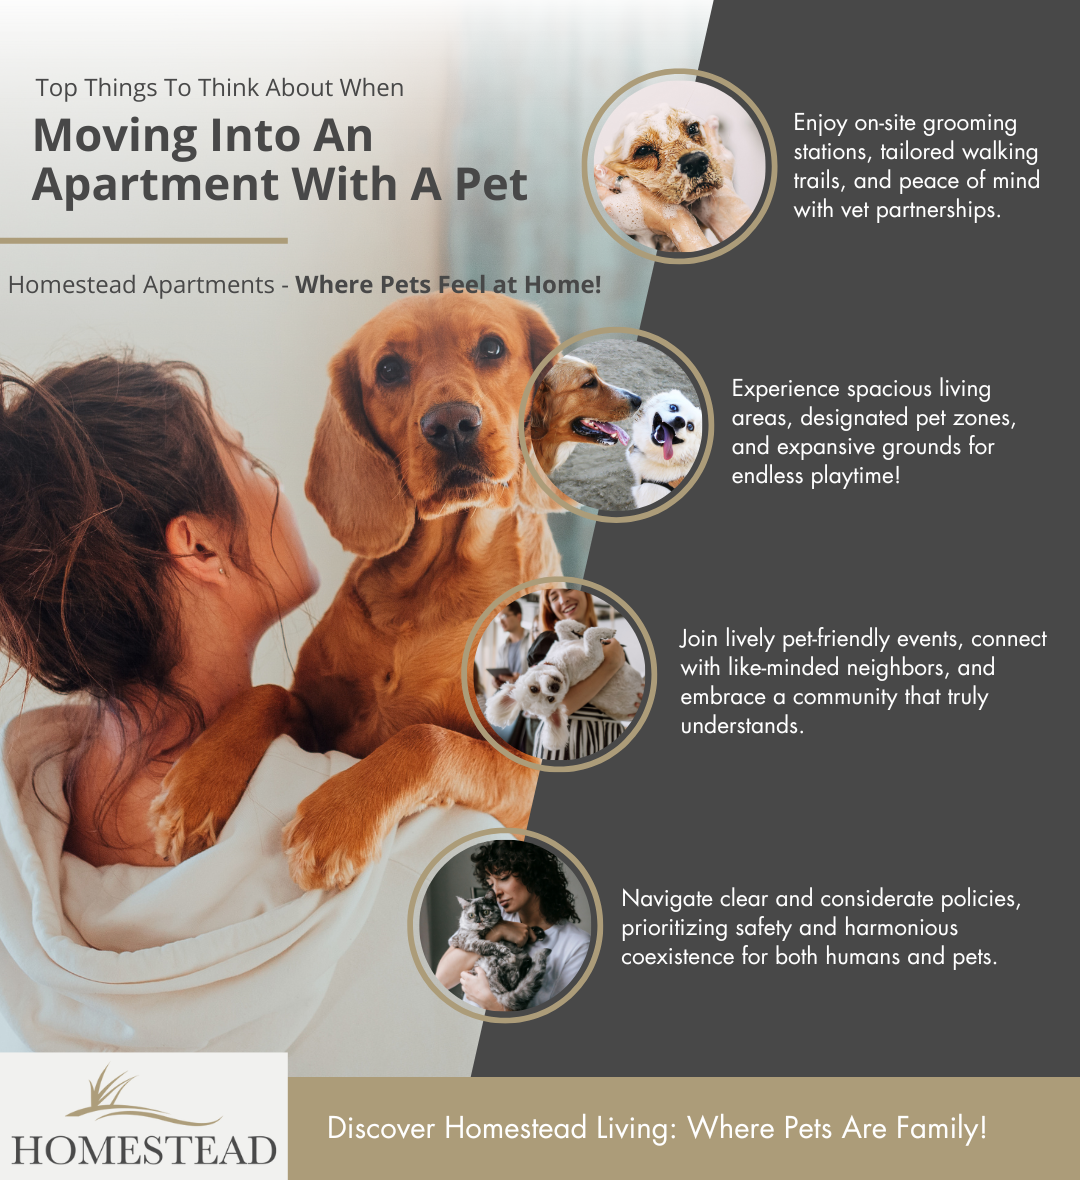 Infographic - Top Things To Think About When Moving Into An Apartment With A Pet.png